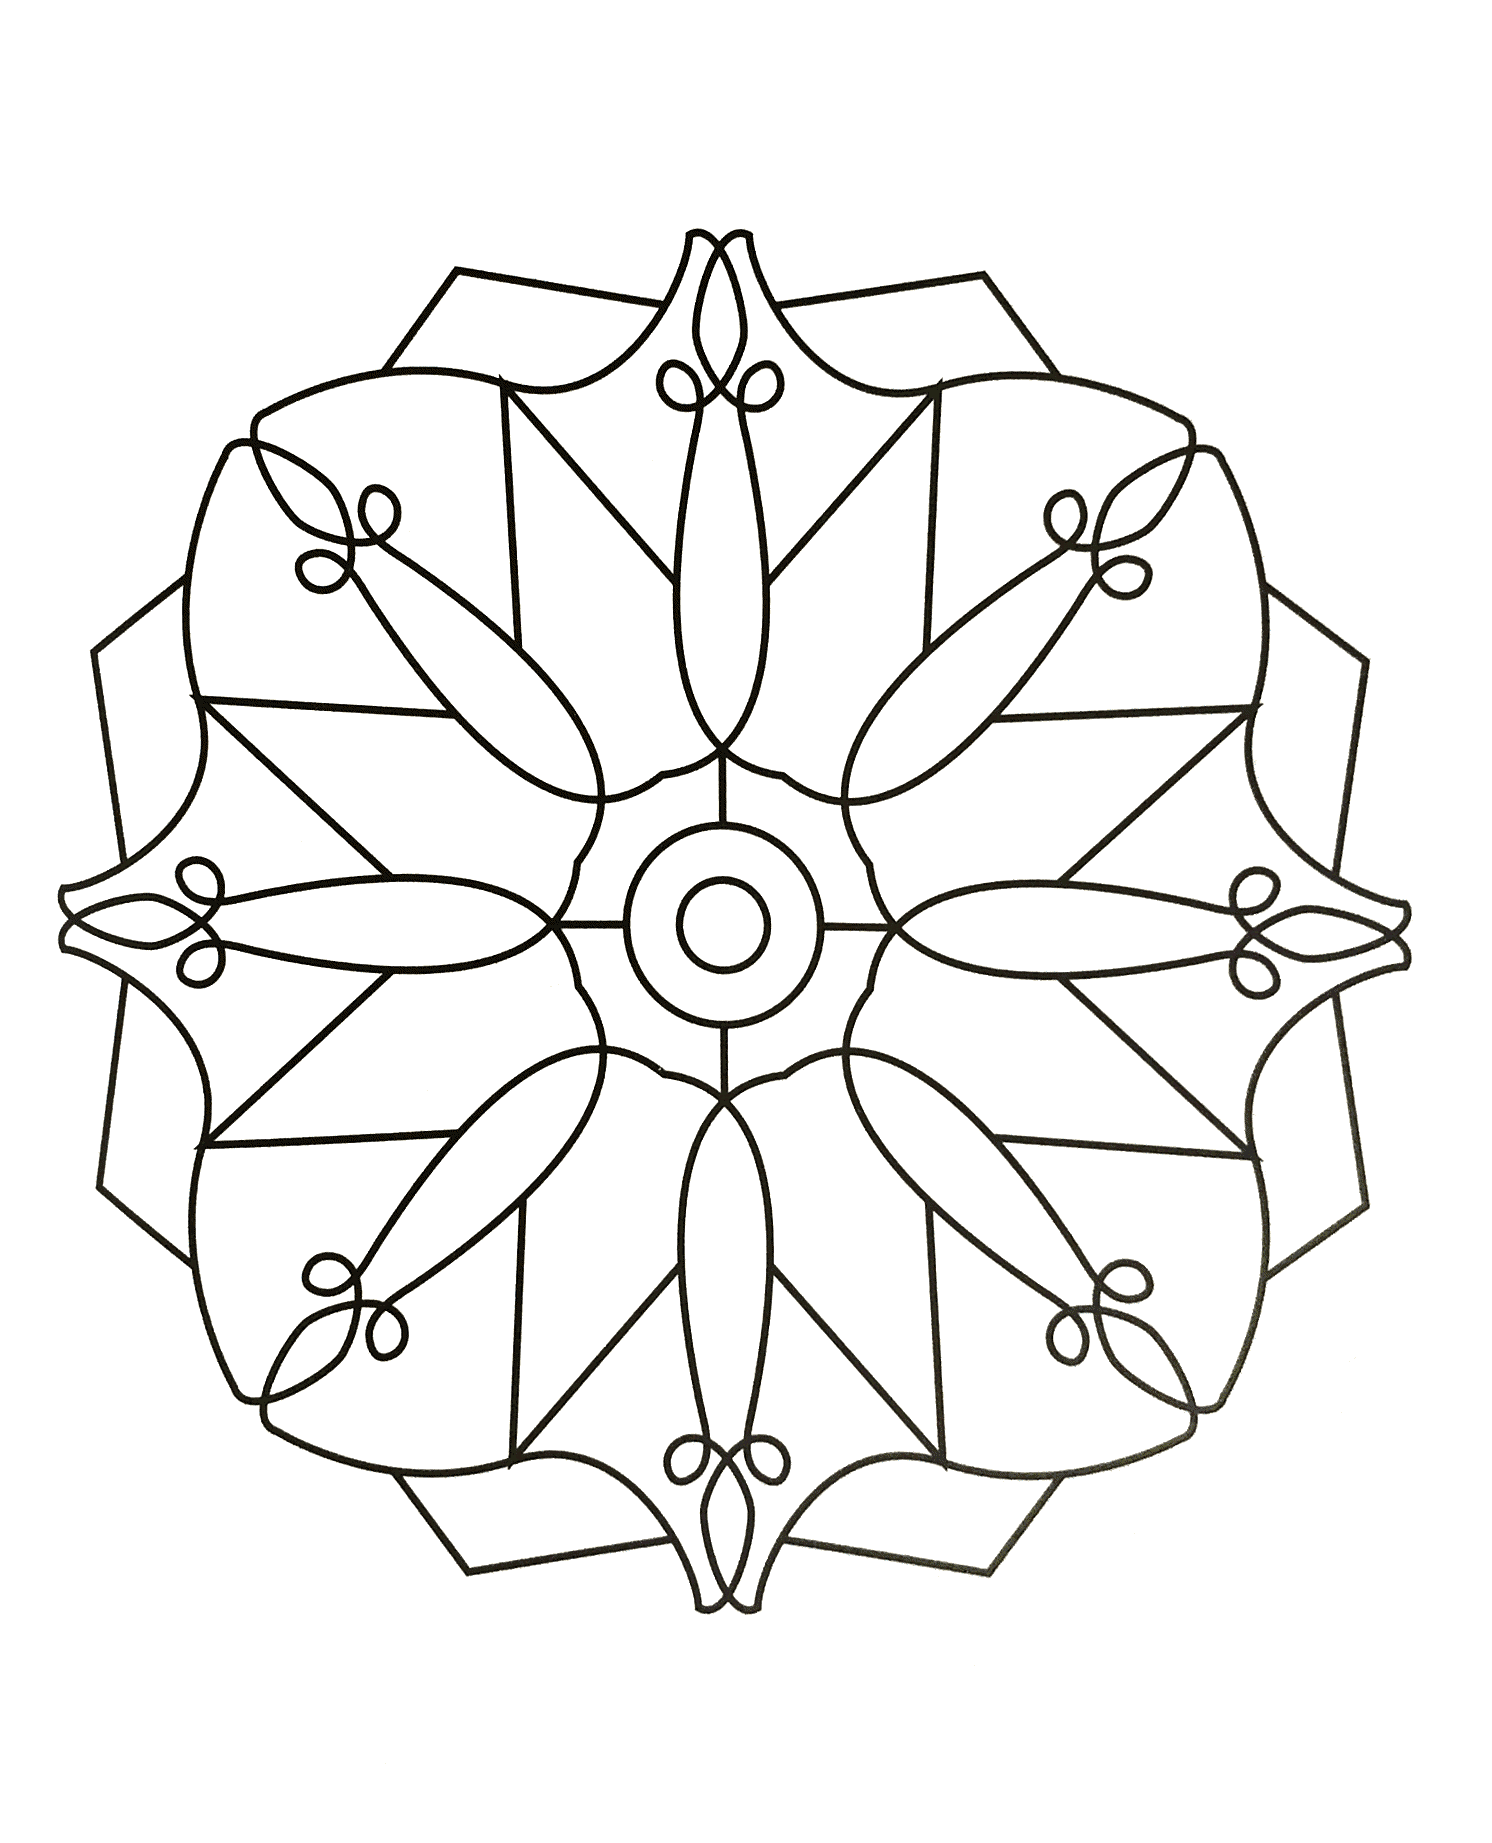 Mandala Coloring Pages With Thick Lines Coloring Pages